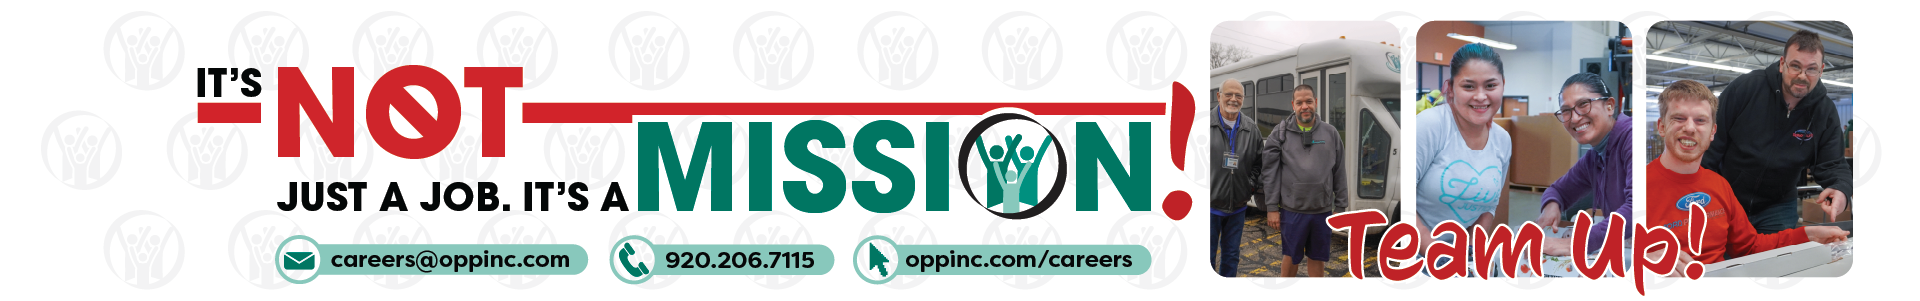 PROFESSION with PURPOSE! Forklift Driver, Janitorial, Assembly/Packaging, Quality Team Lead, Logistics Specialist, Truck Driver